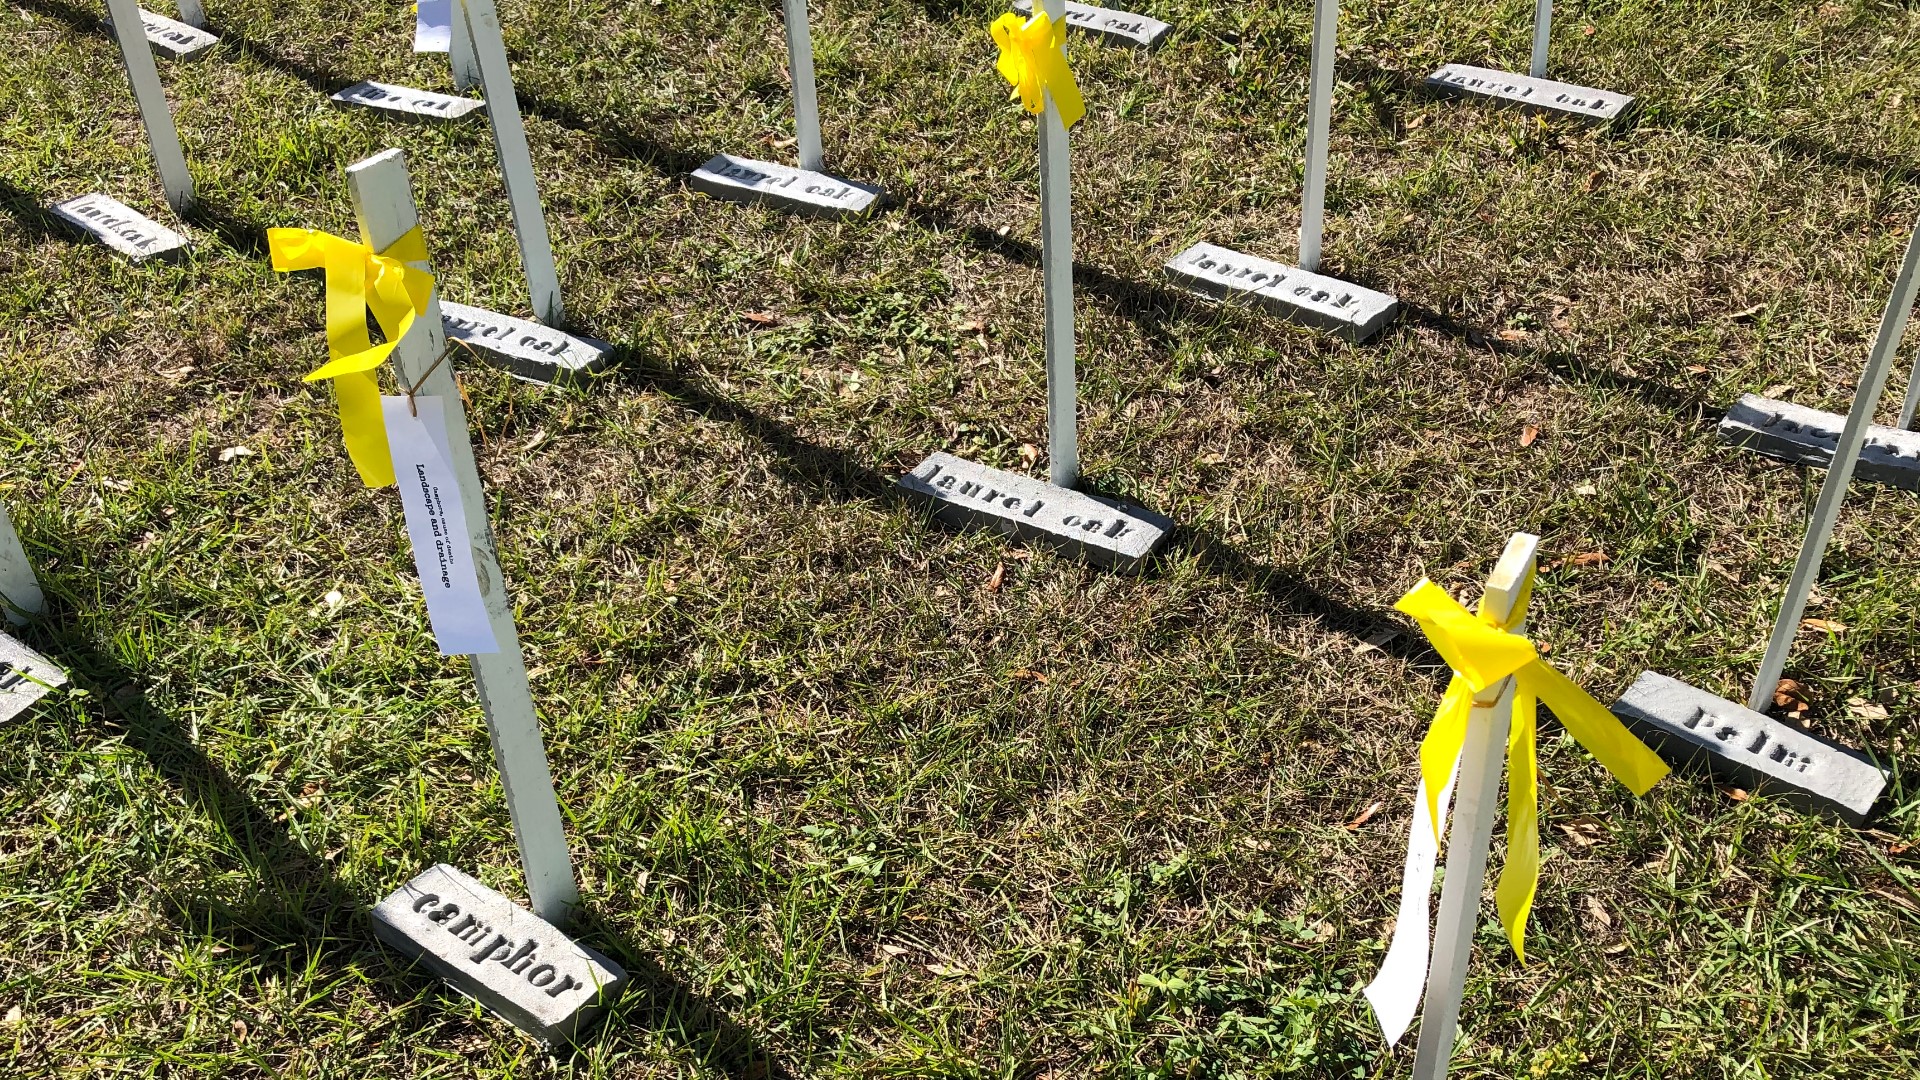 White wooden crosses with a yellow ribbon are placed in the grass. Each one has a label featuring the type of tree that was cut down.